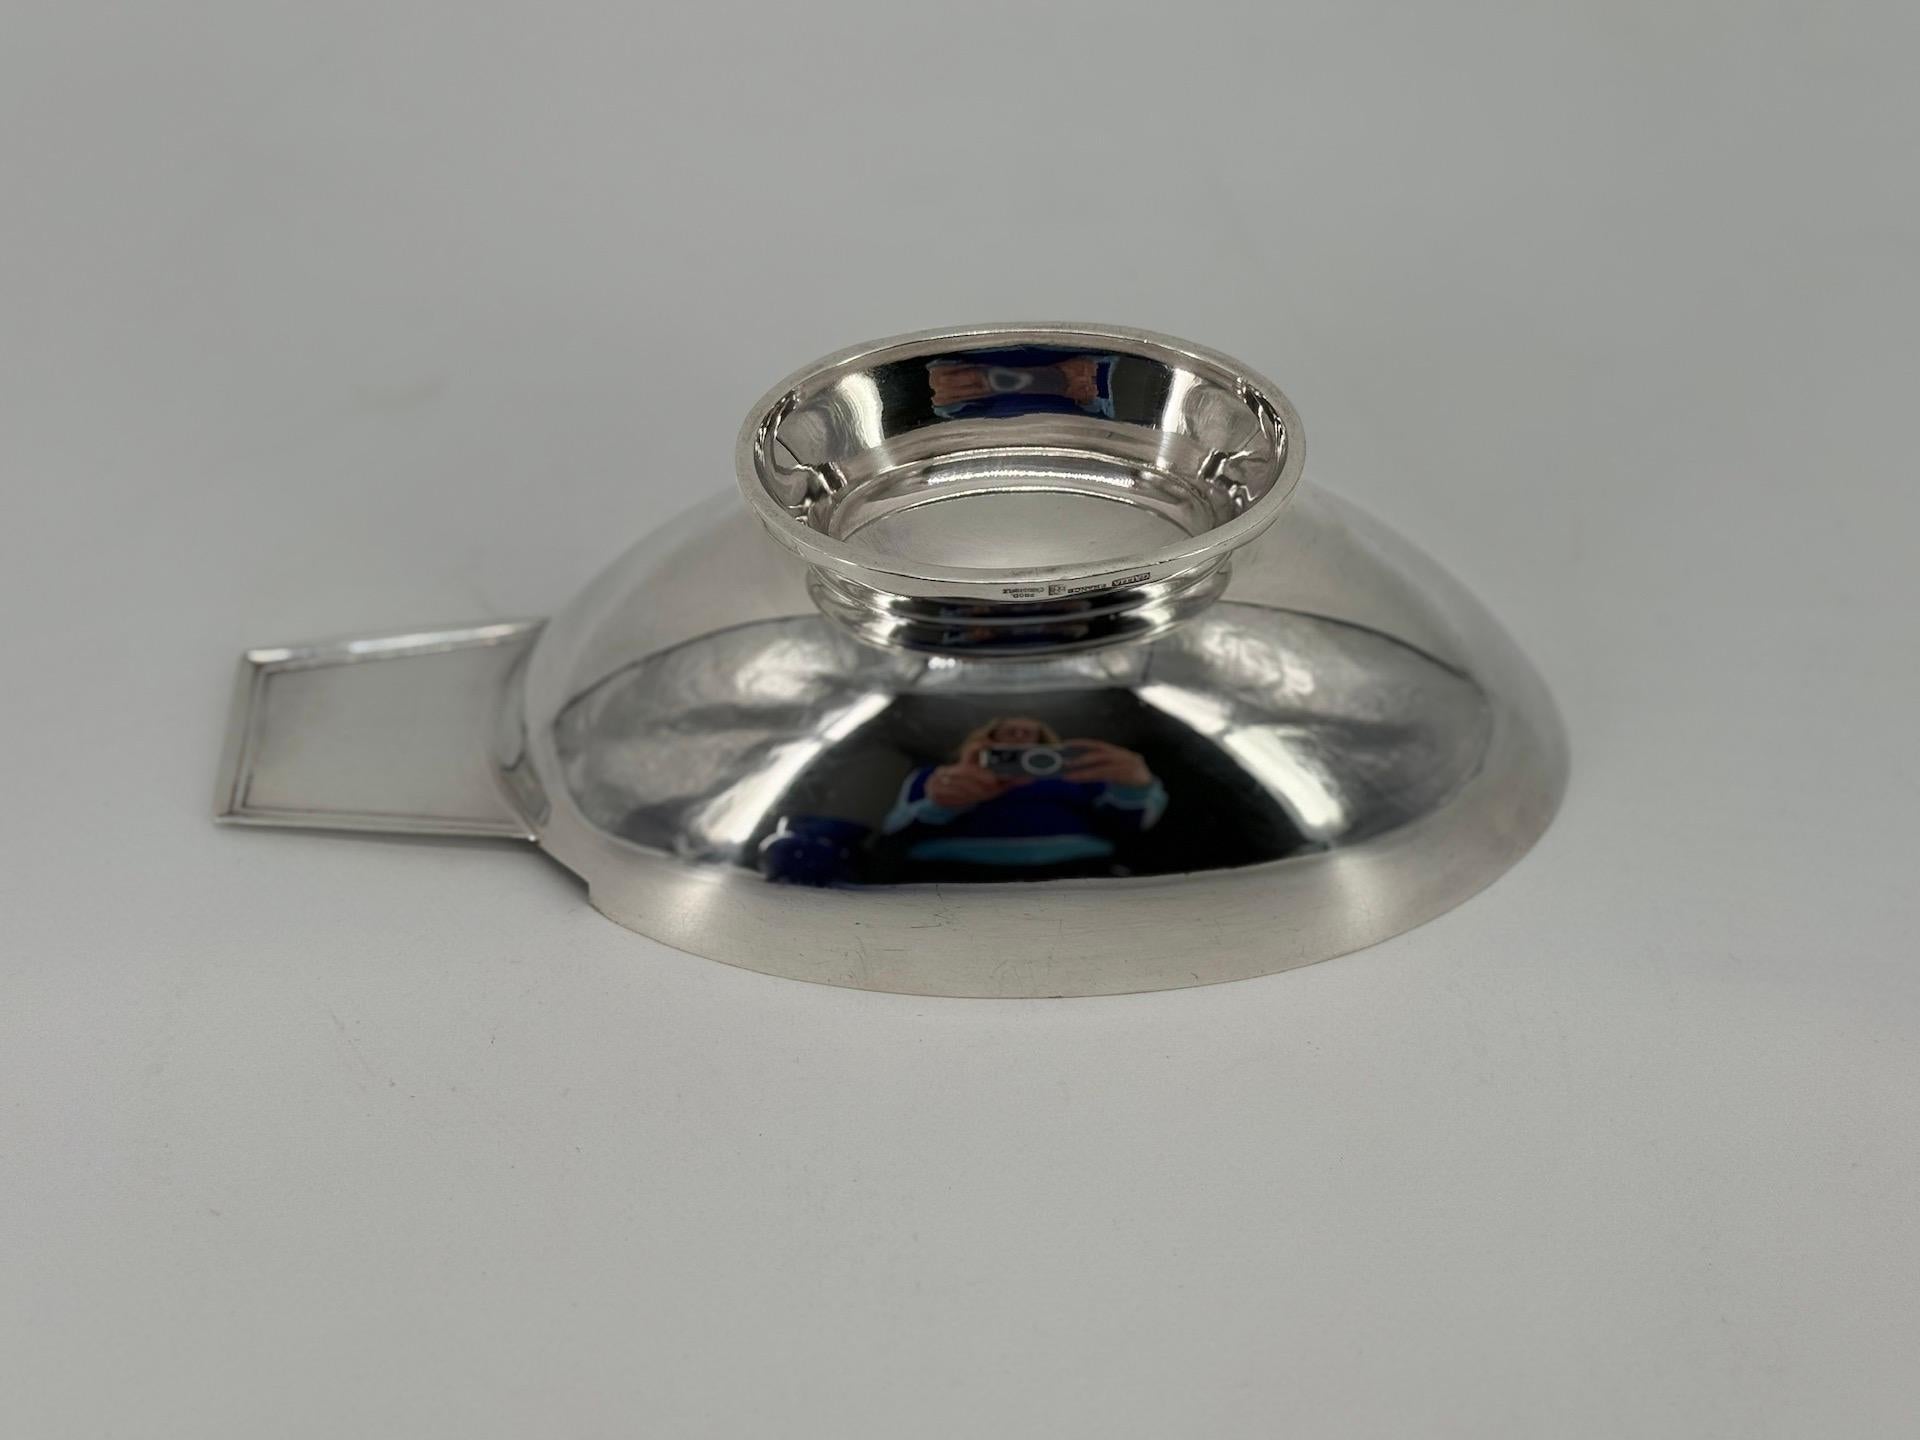 20th Century Gallia For Christofle, Silver Plated Gravy Boat ’Swan’ By Christian Fjerdingstad For Sale